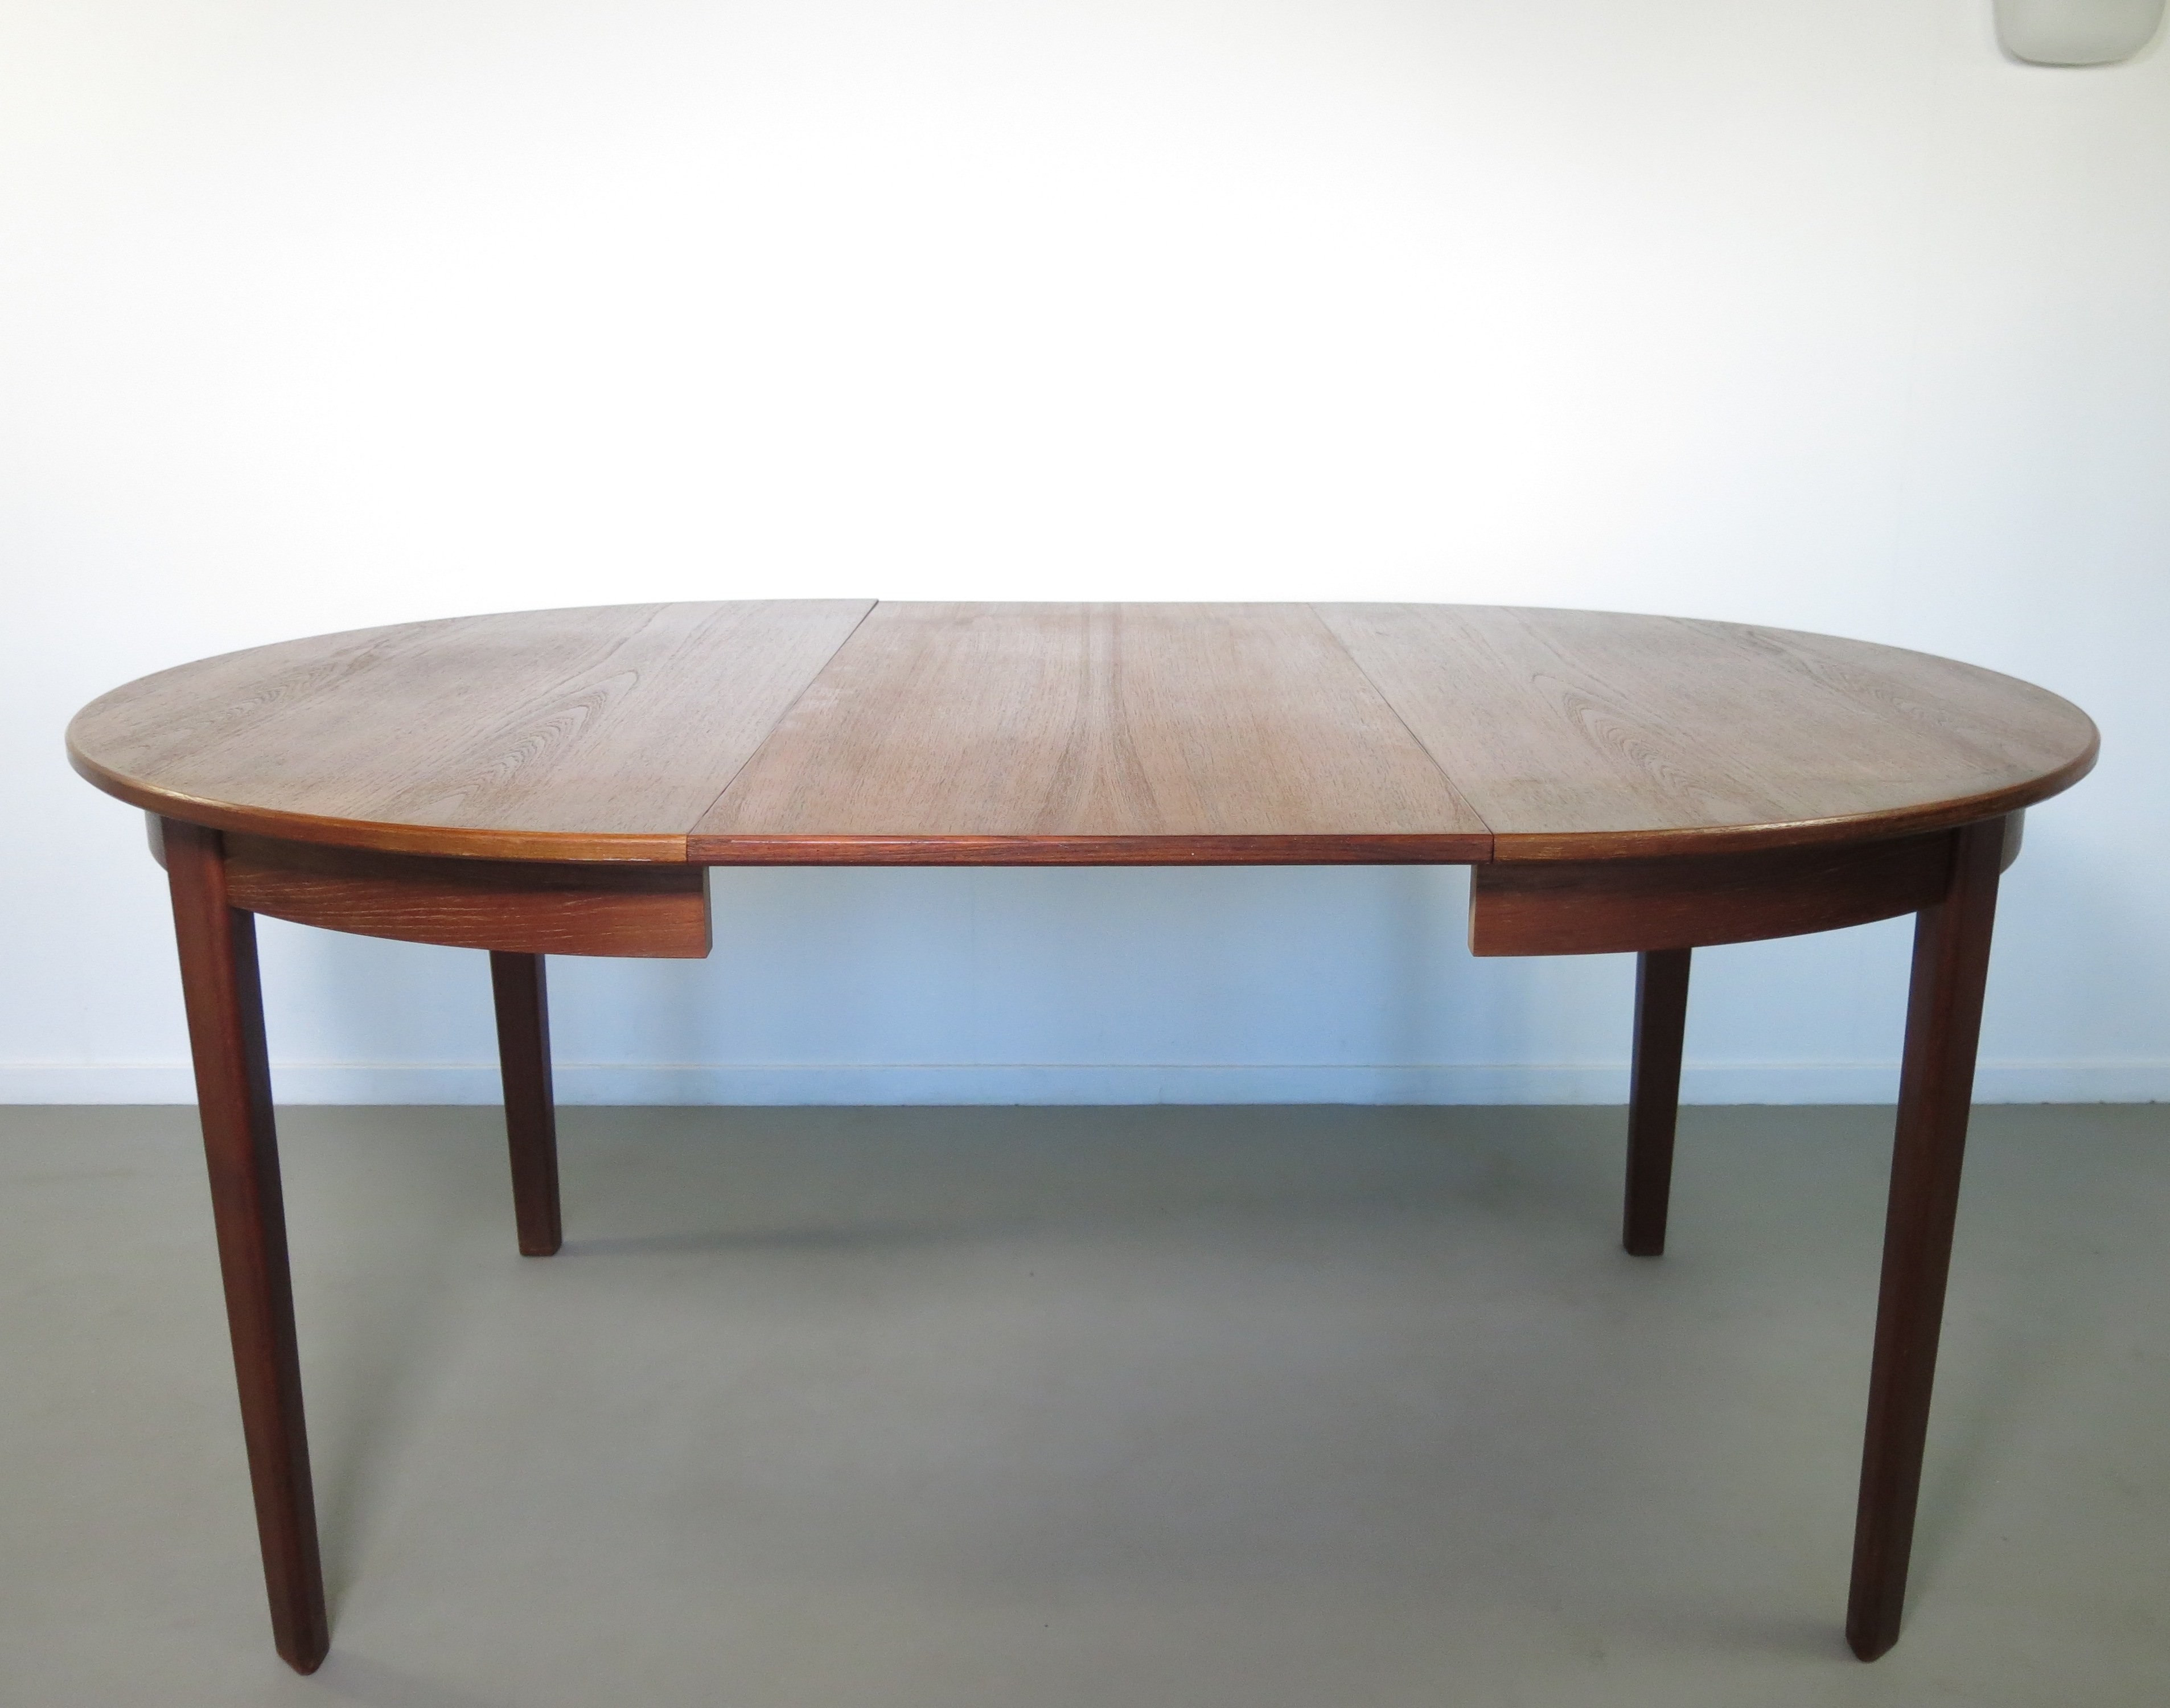 Extendable Outdoor Teak Dining Table